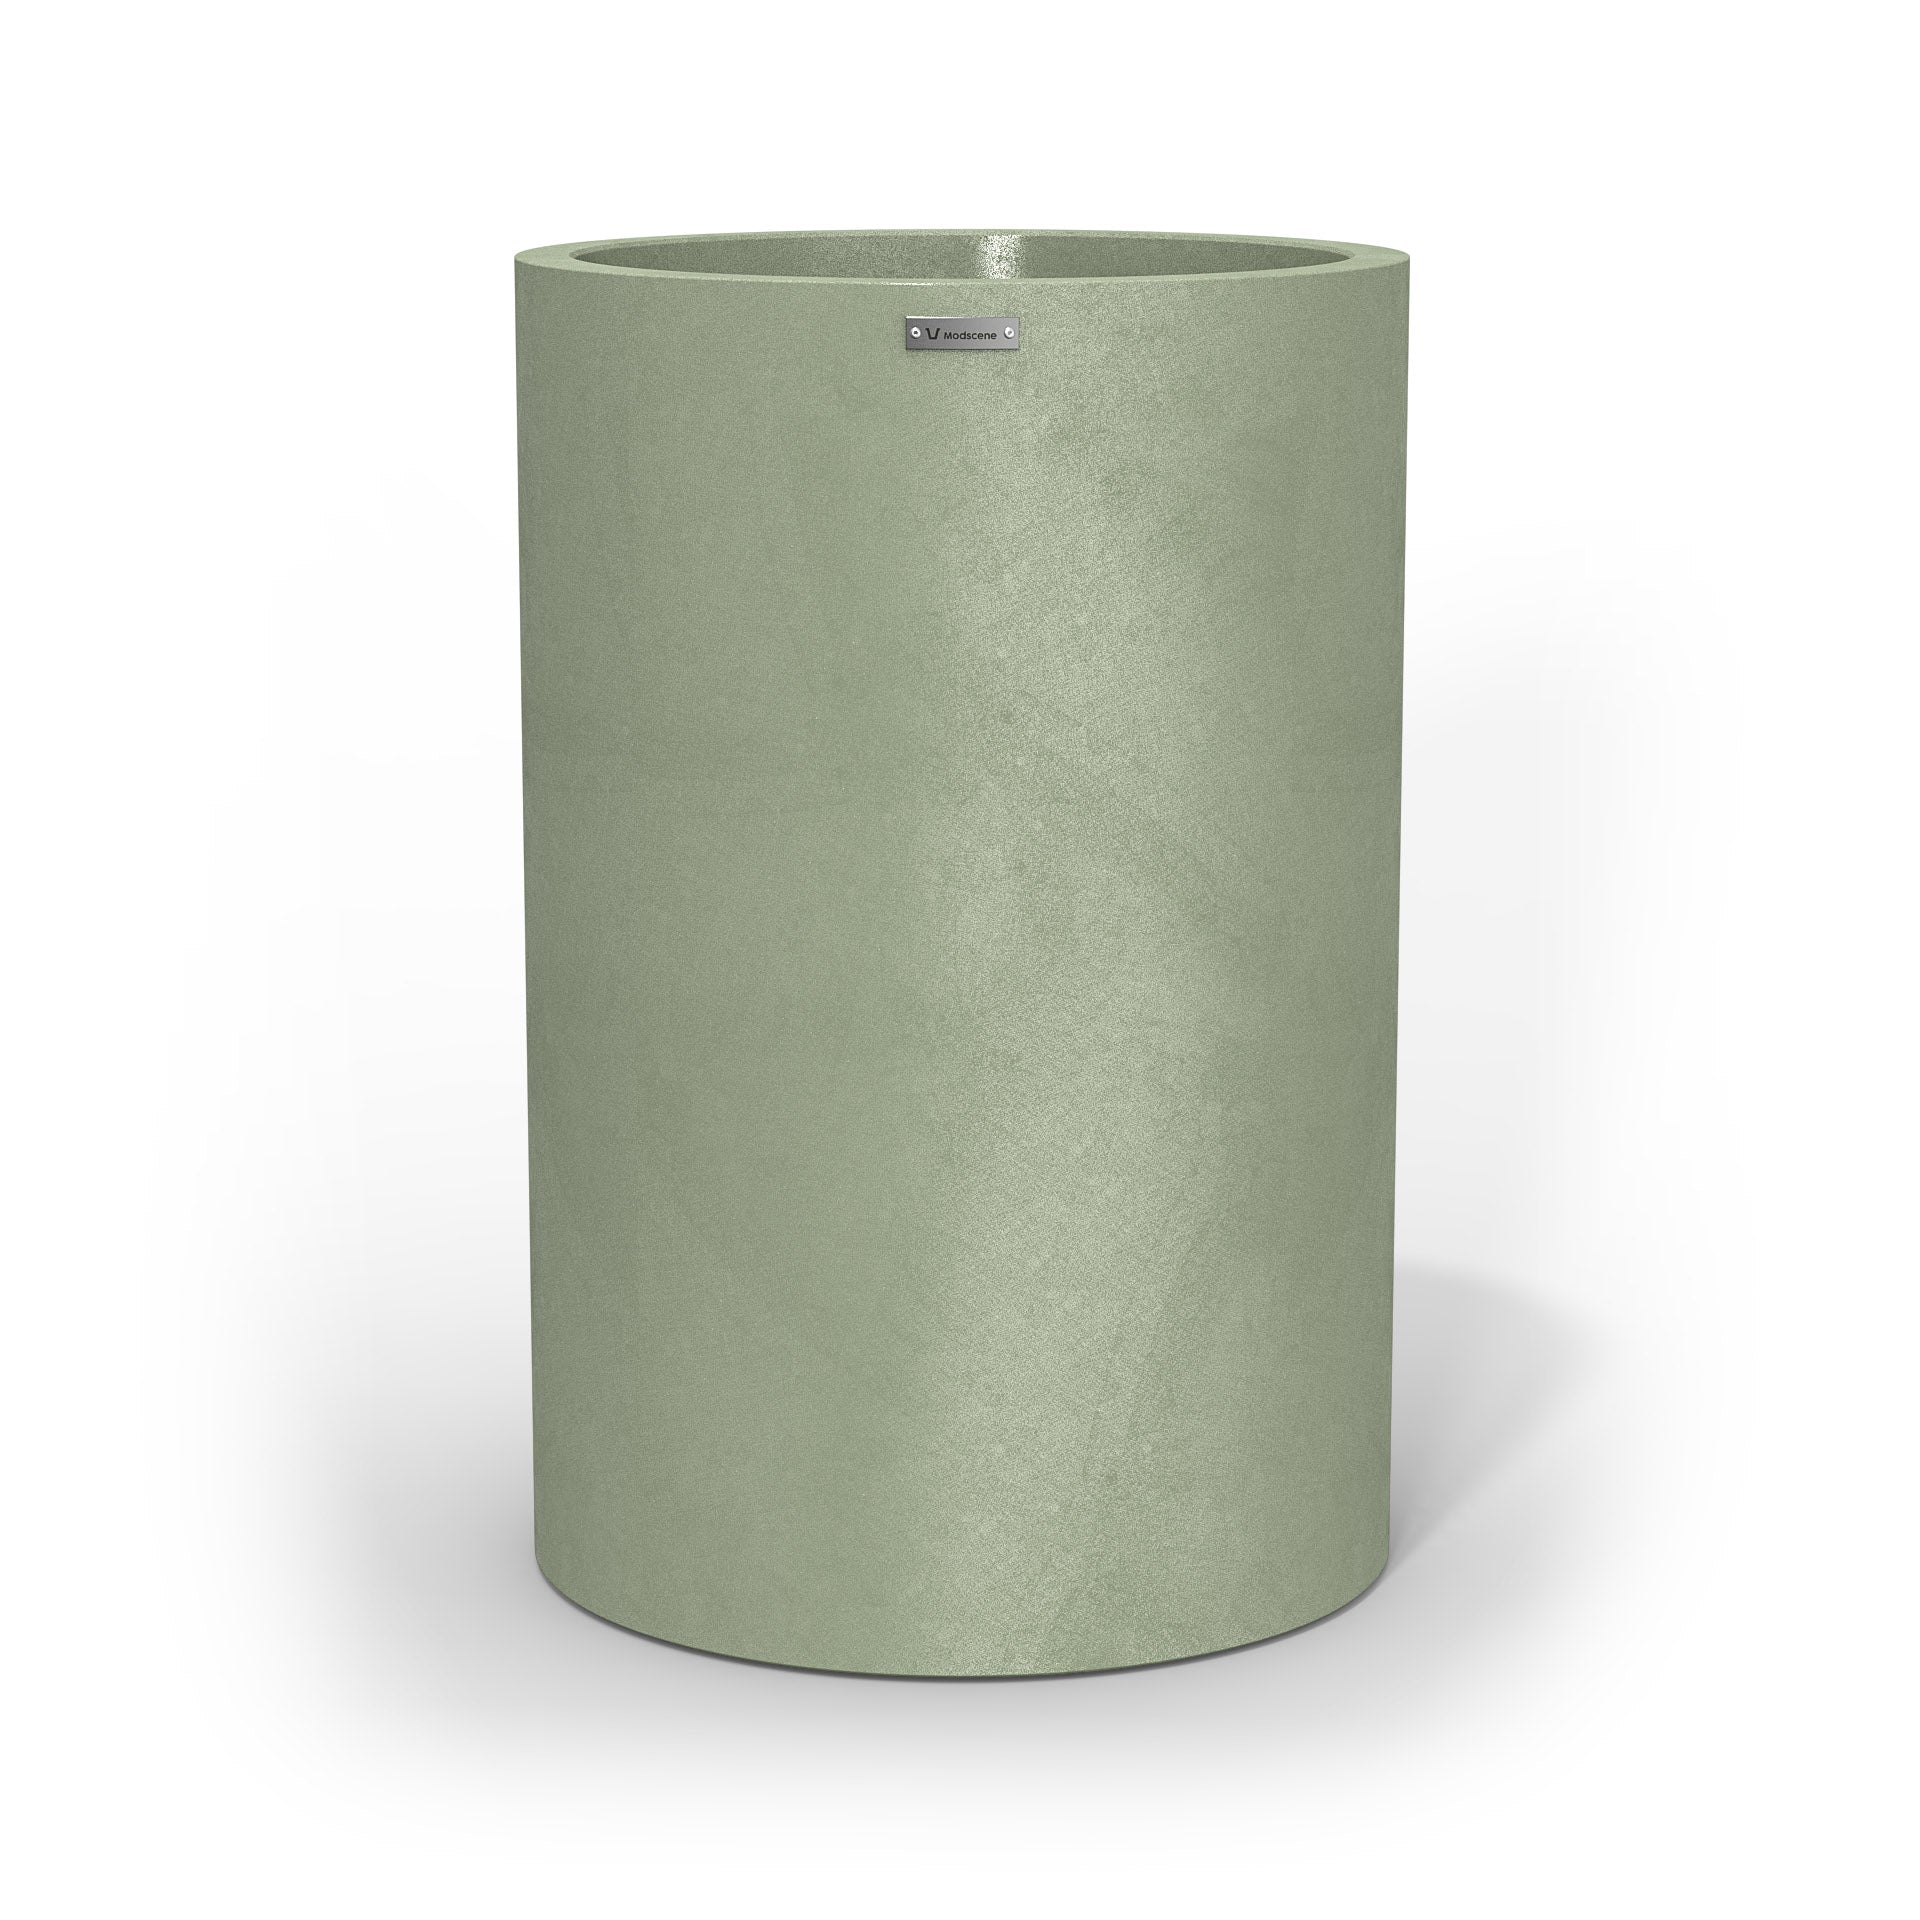 Modscene cylinder shaped planter pot in a pastel green colour with a concrete look.